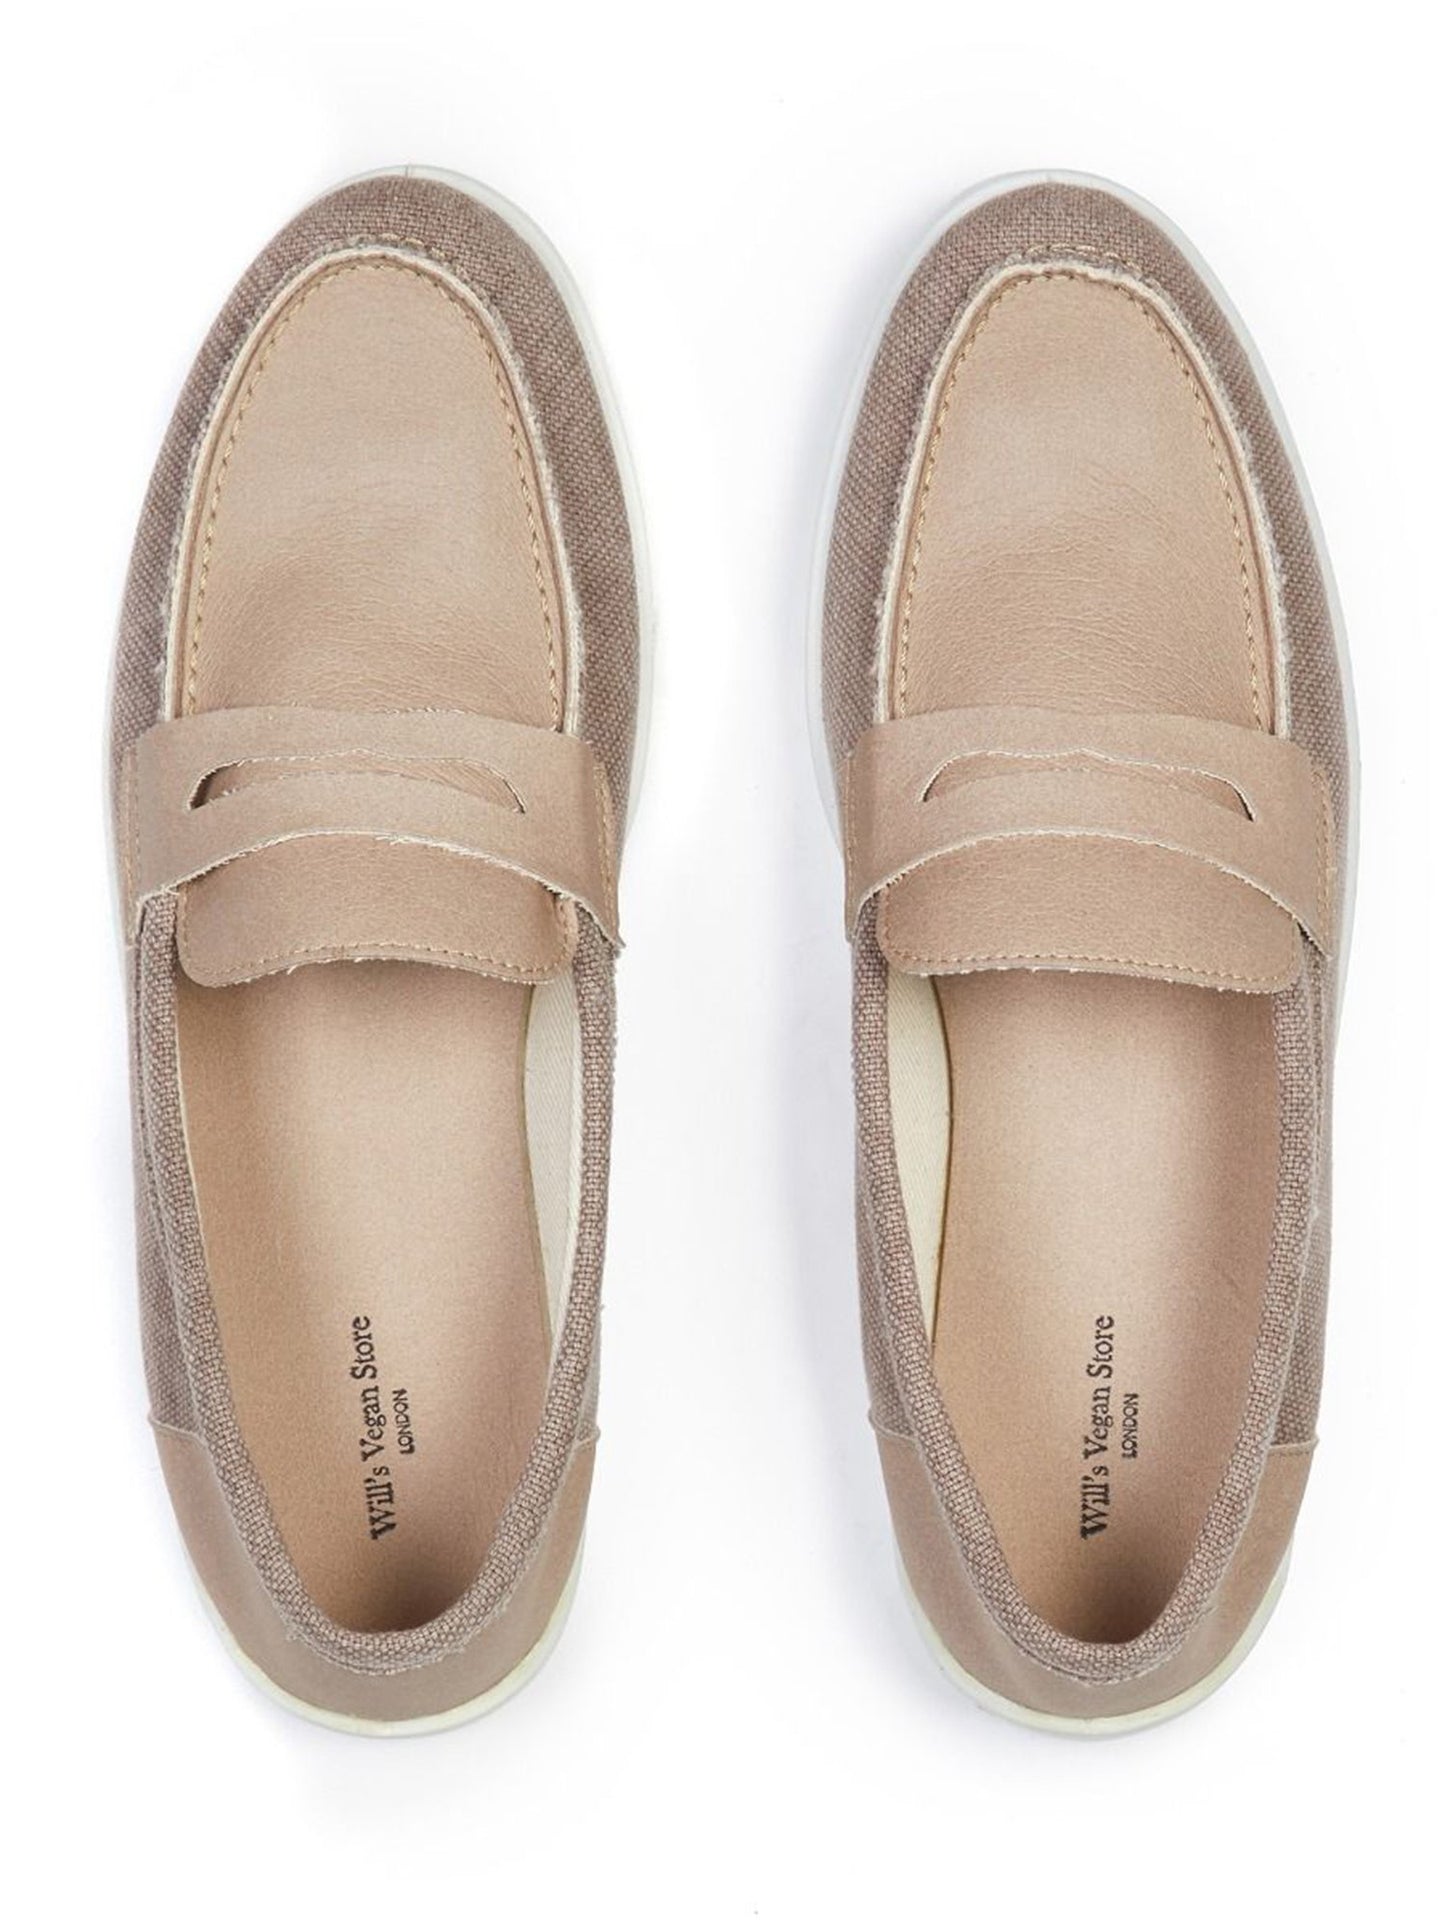 Vegan Men's Recycled Espadrille Penny Loafers | Will's Vegan Store